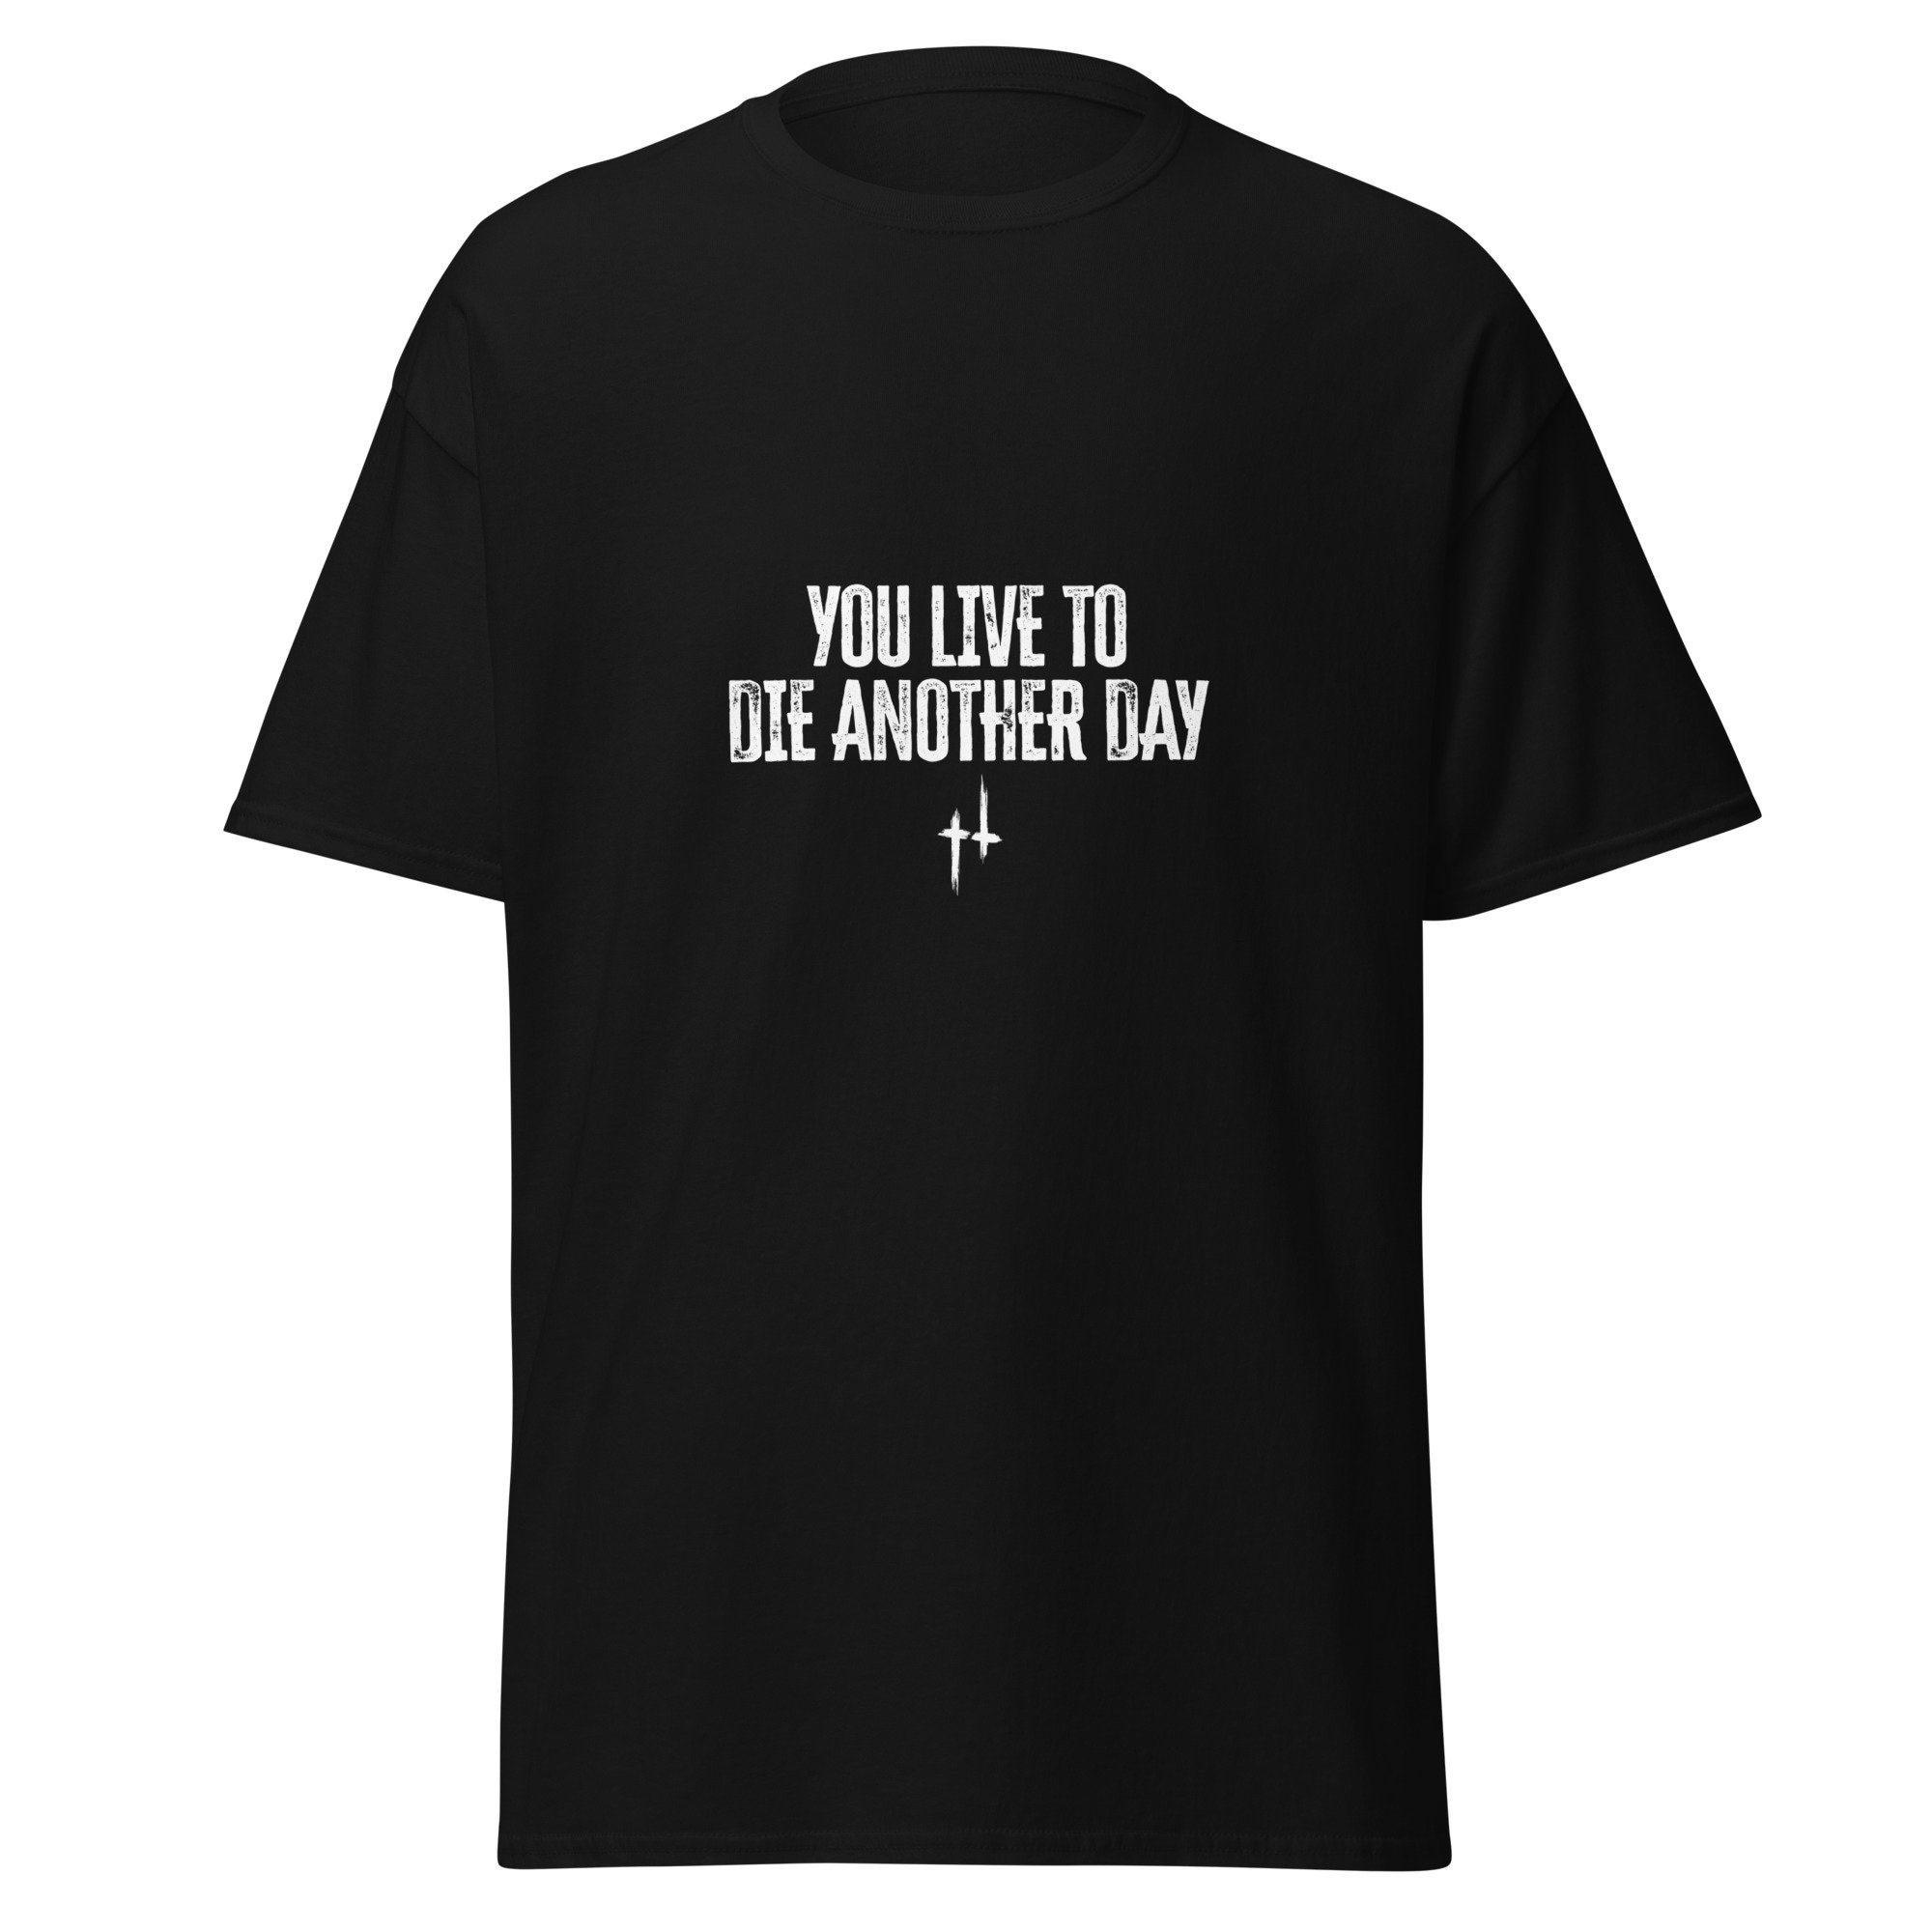 Hunt Showdown Classic T-shirt You Live to Die Another Day HS Game Gaming -   Canada